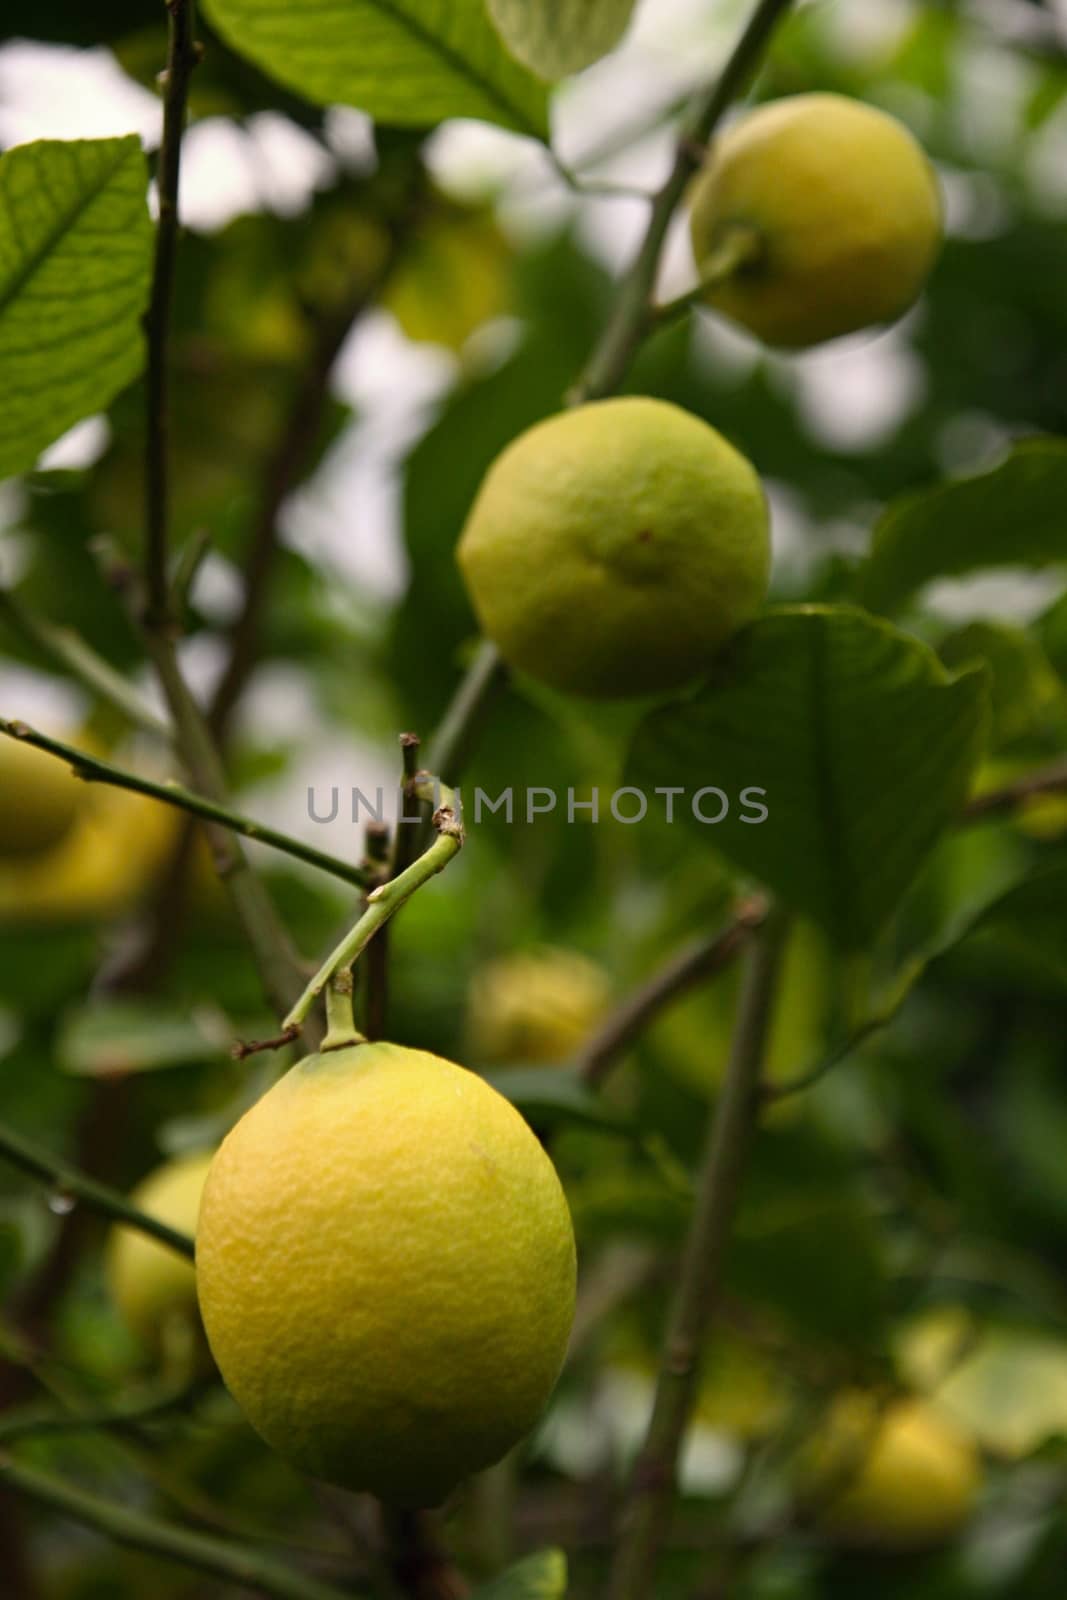 Ripe yellow lemons hanging on tree and green leaves